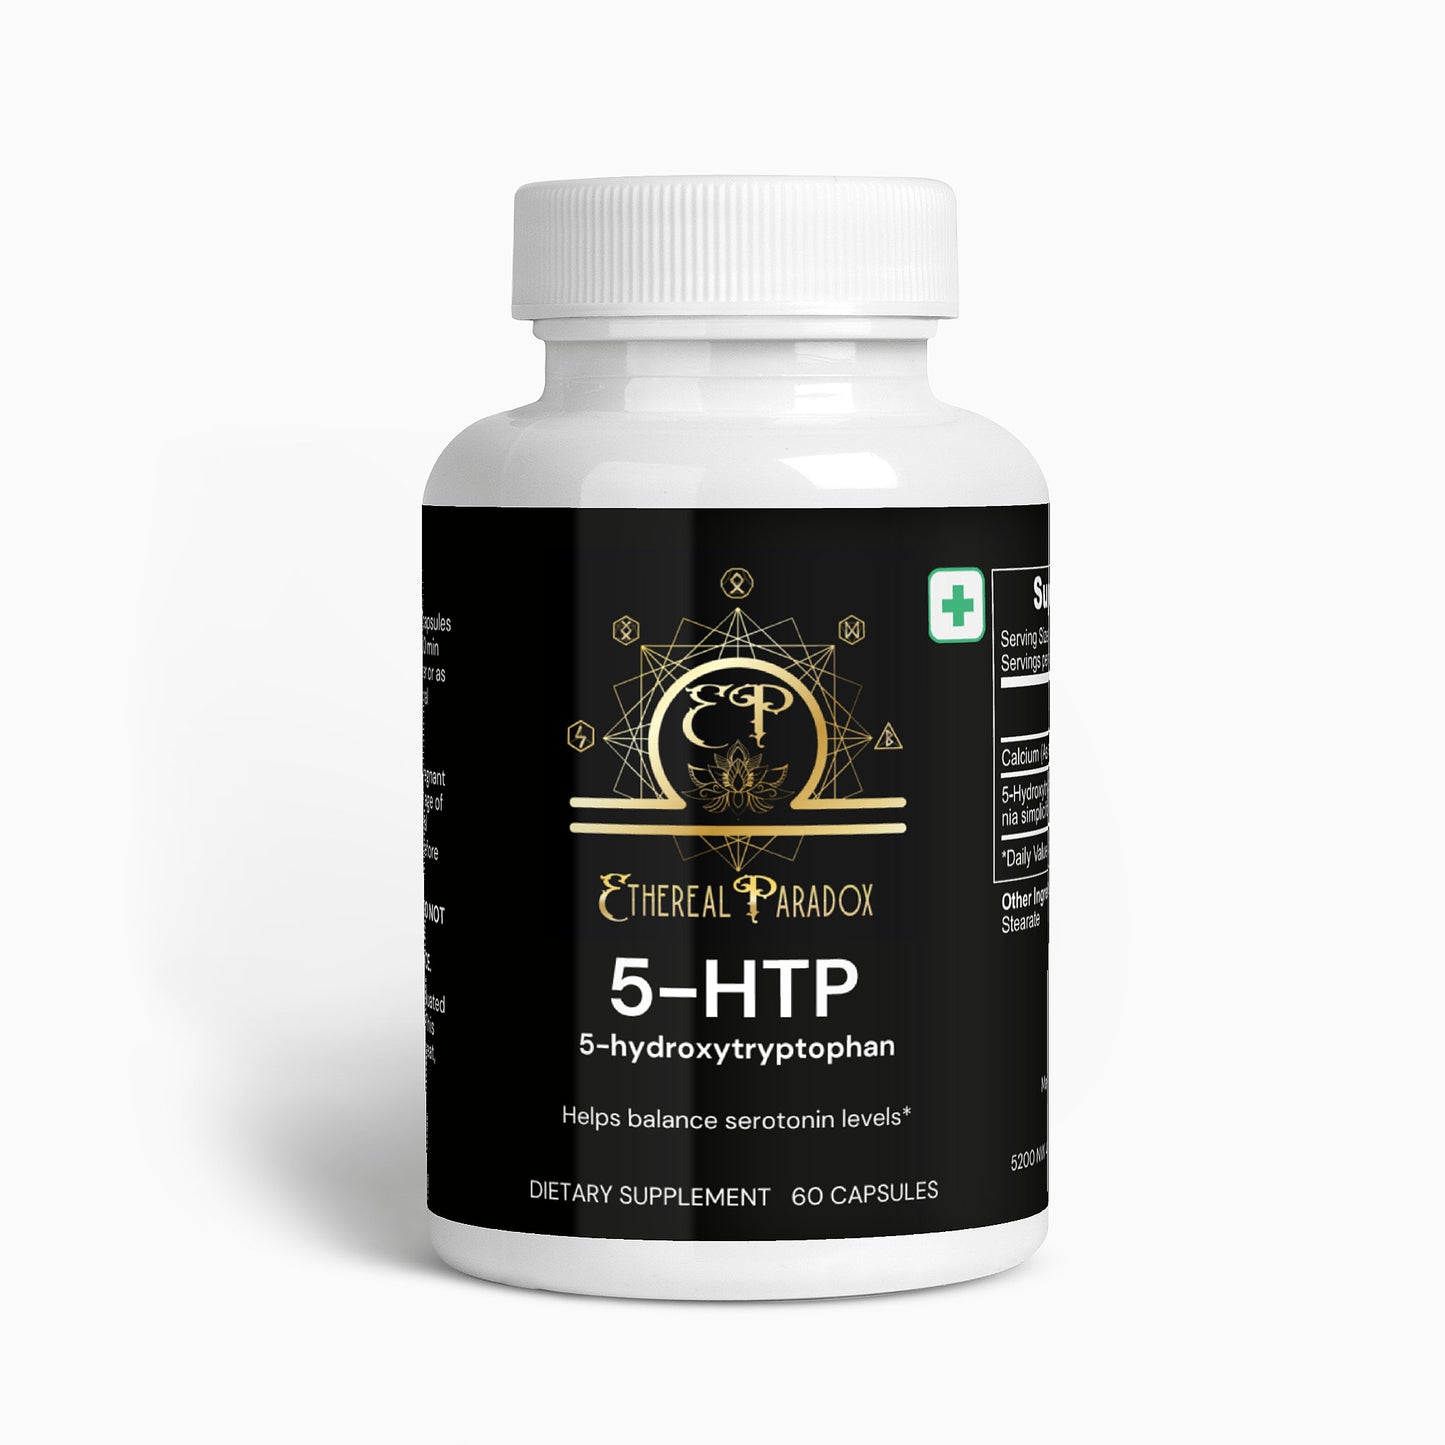 All-Natural 5-HTP | 5=hydroxytryptophan